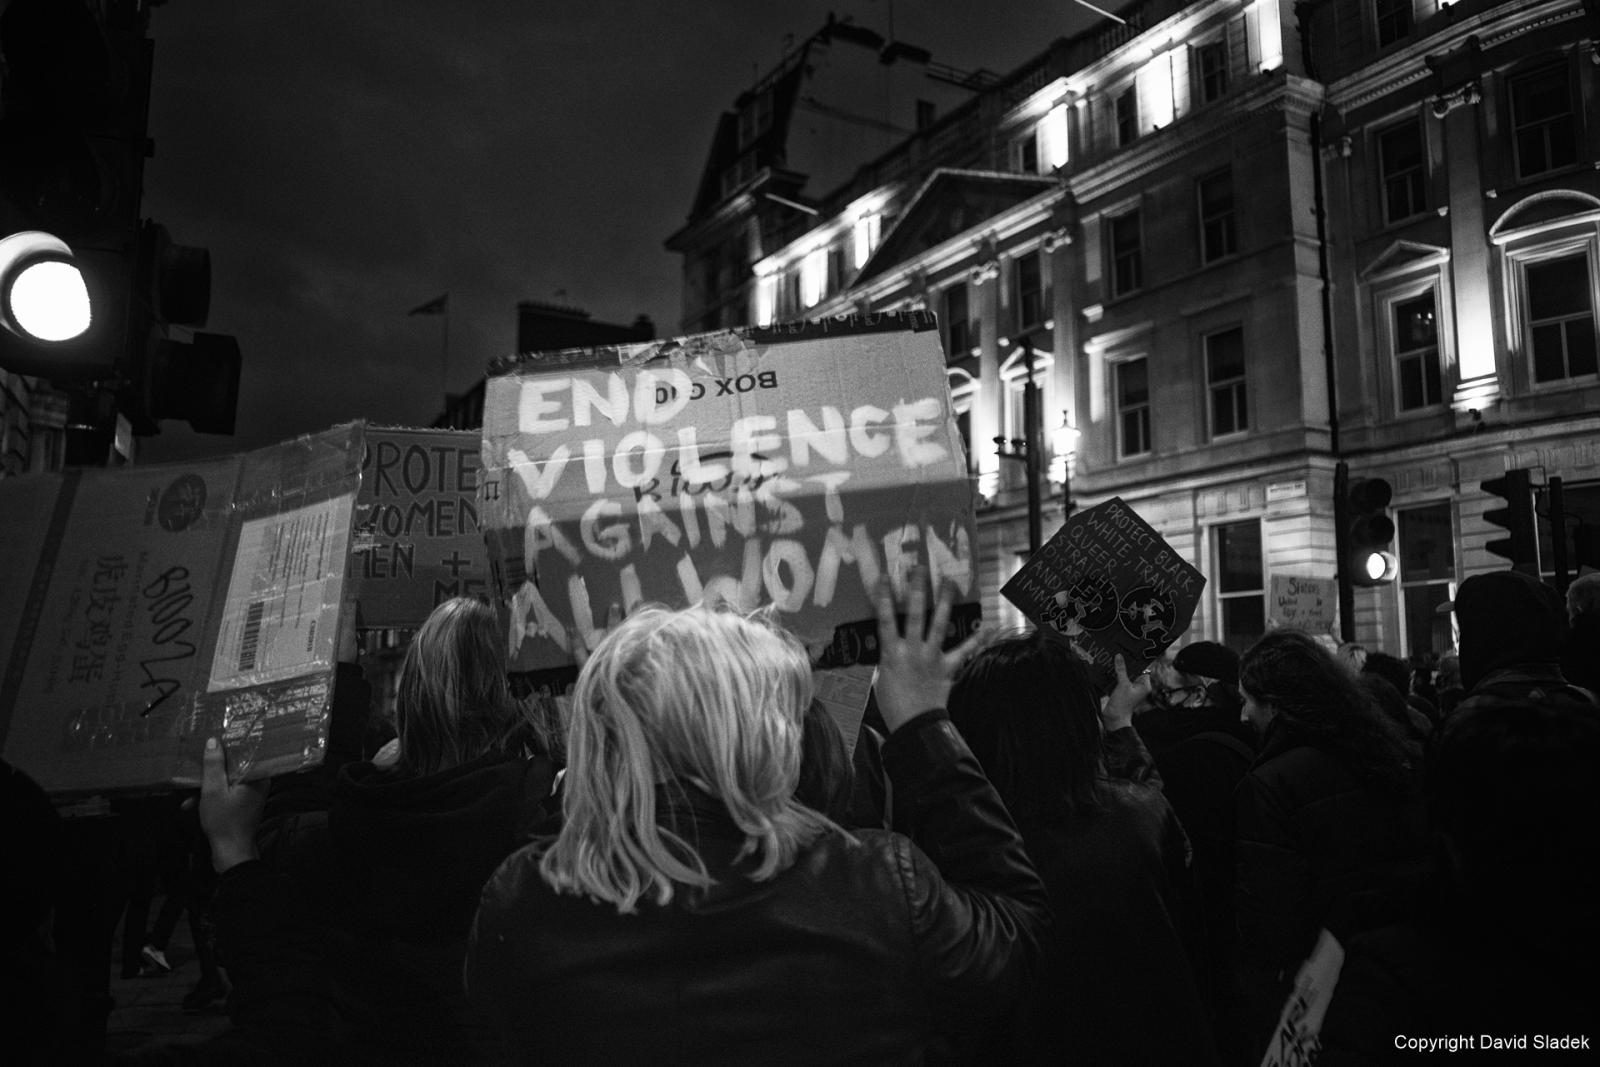 From Reclaim the streets - protest against policing of Sarah Everard vigil, London, 14/03/2021